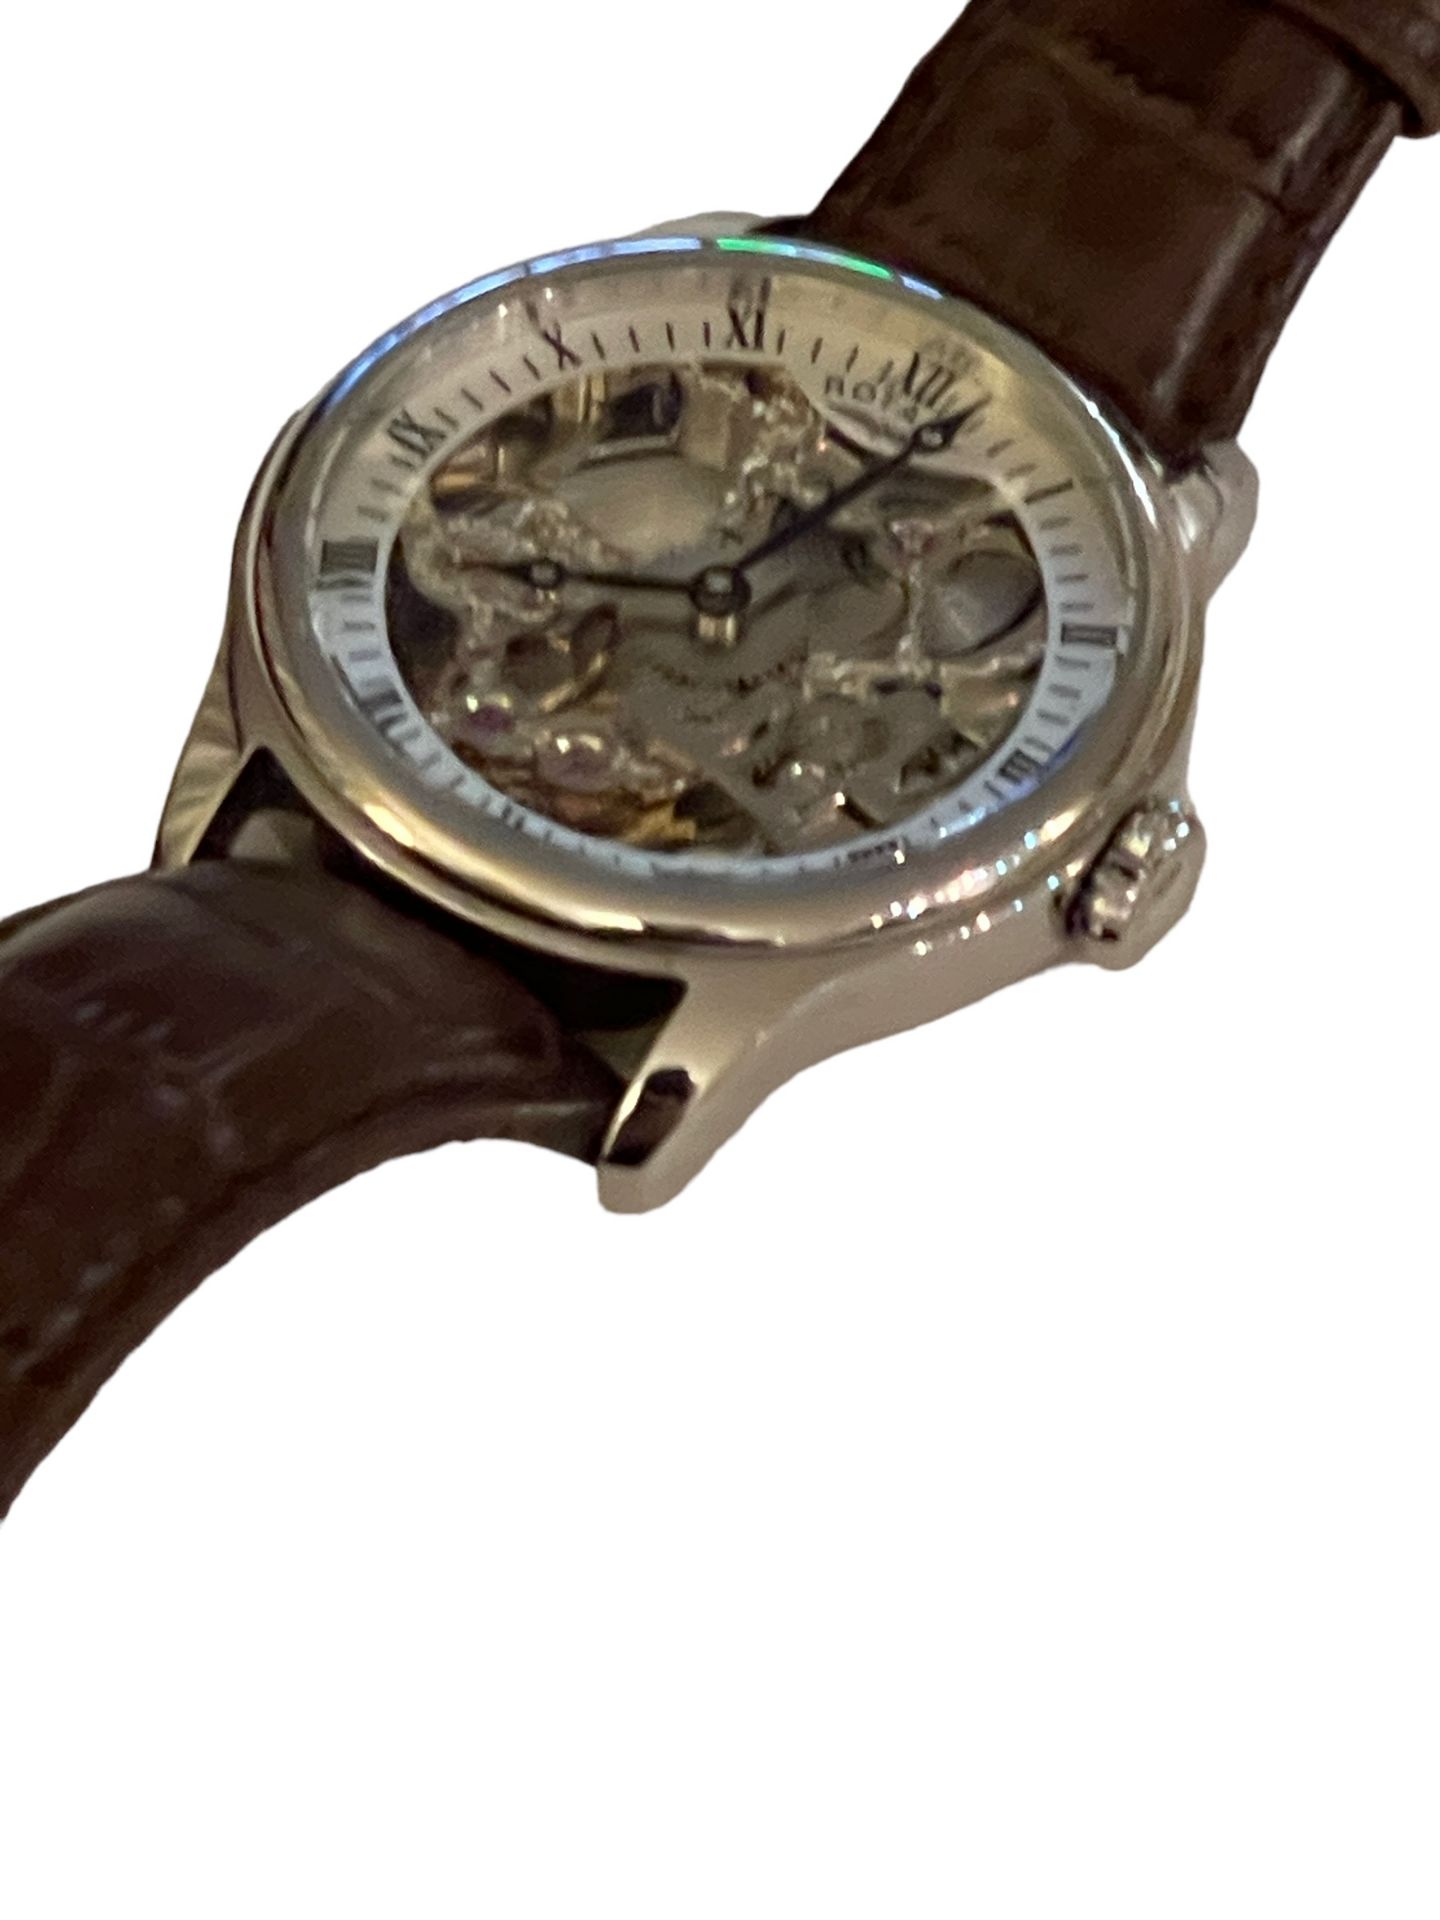 Rotary watch return/spares/lost property from a private jet charter with no reserve - Image 3 of 4